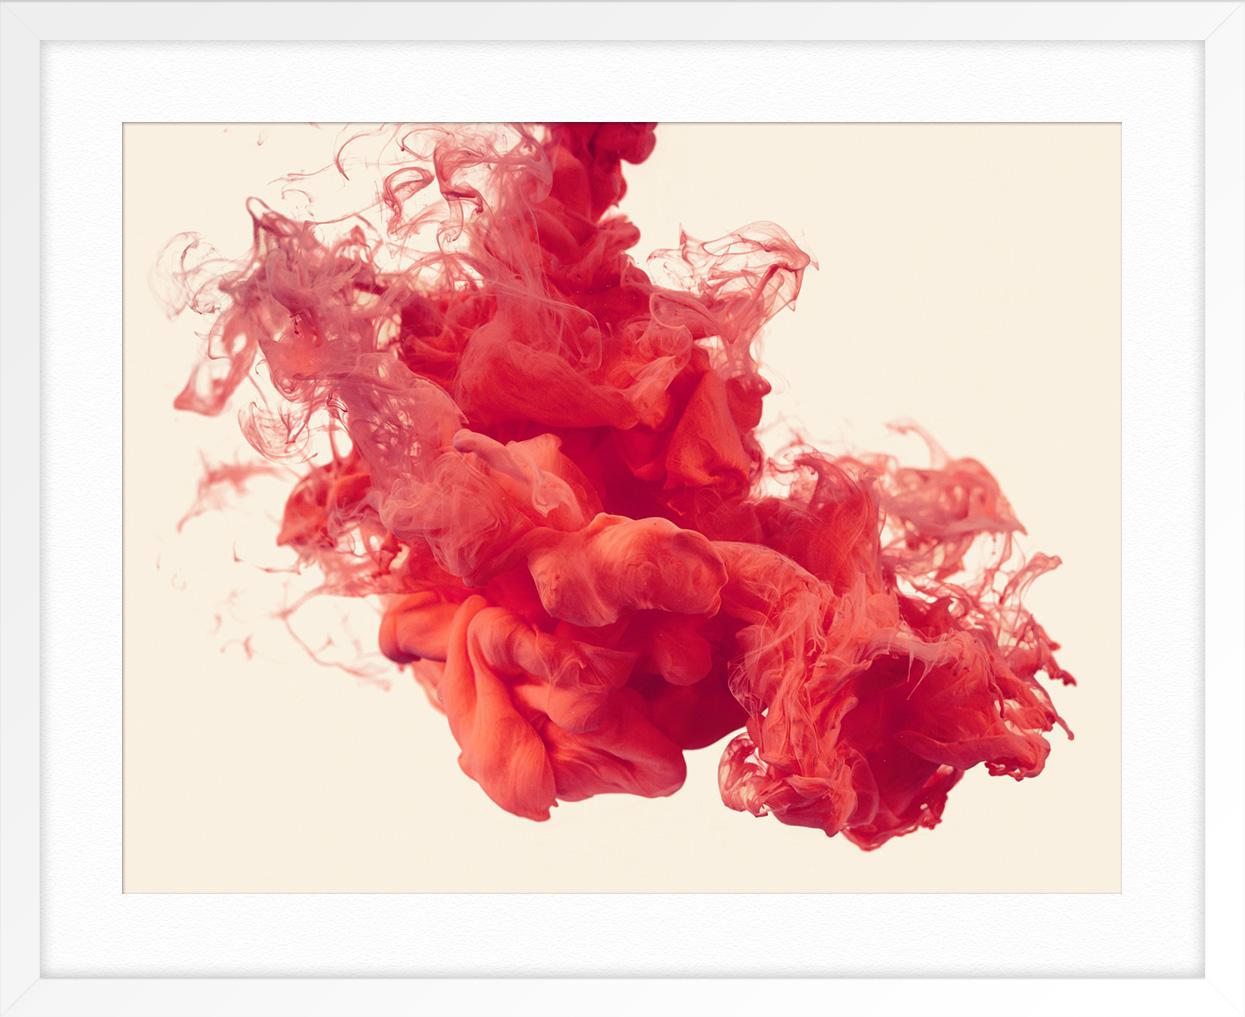 ABOUT THIS PIECE: Alberto practices high-speed photography. He has mastered the balance of pouring varnish into water and using his high-speed photography knowledge to capture the movement of the colored pigment through water.

ABOUT THIS ARTIST: